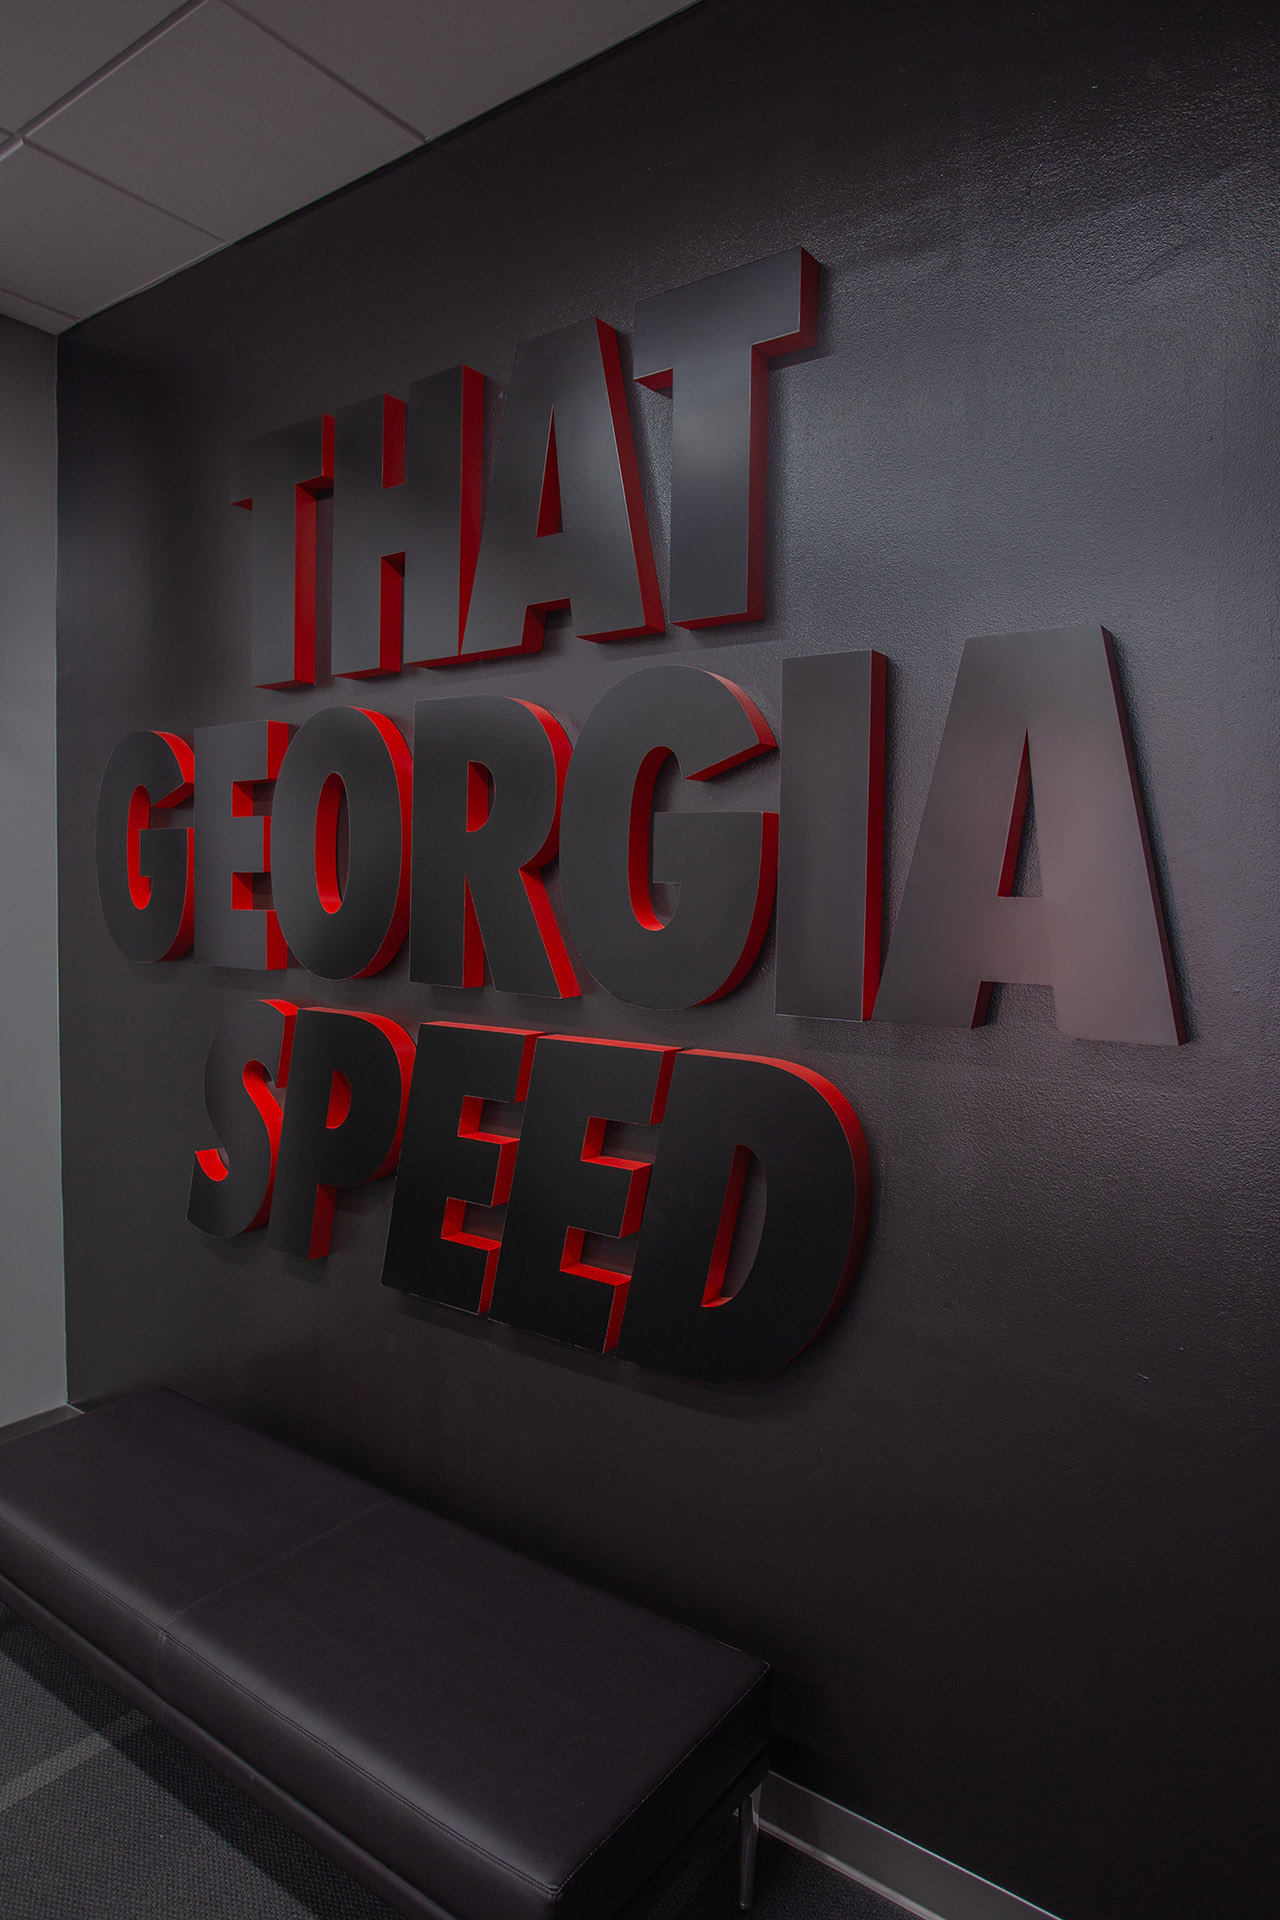 University of Georgia Track and Field Entry Lobby Dimensional Lettering